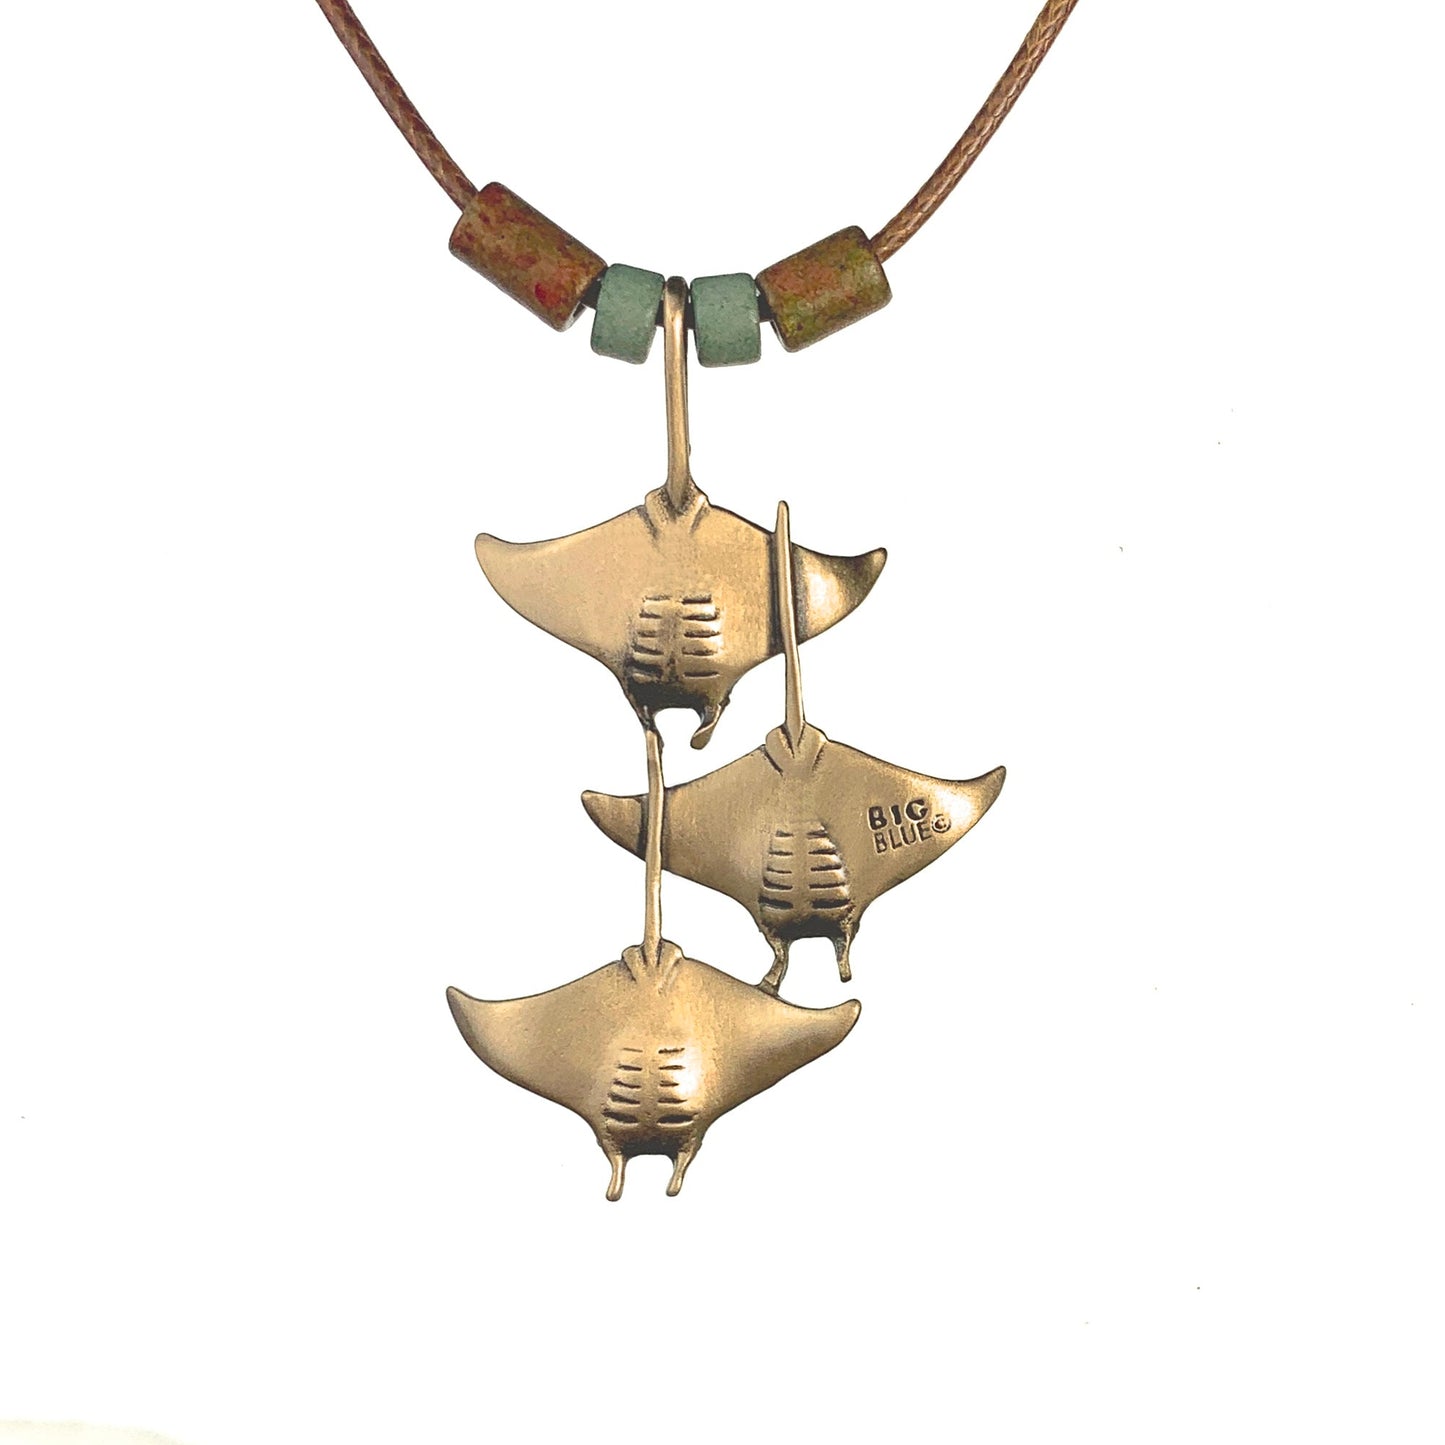 Manta Ray Necklace Antique Bronze- Stingray Jewelry, Manta Ray Pendant, Scuba Diving Jewelry, Ocean Inspired Bronze Jewelry - The Tool Store